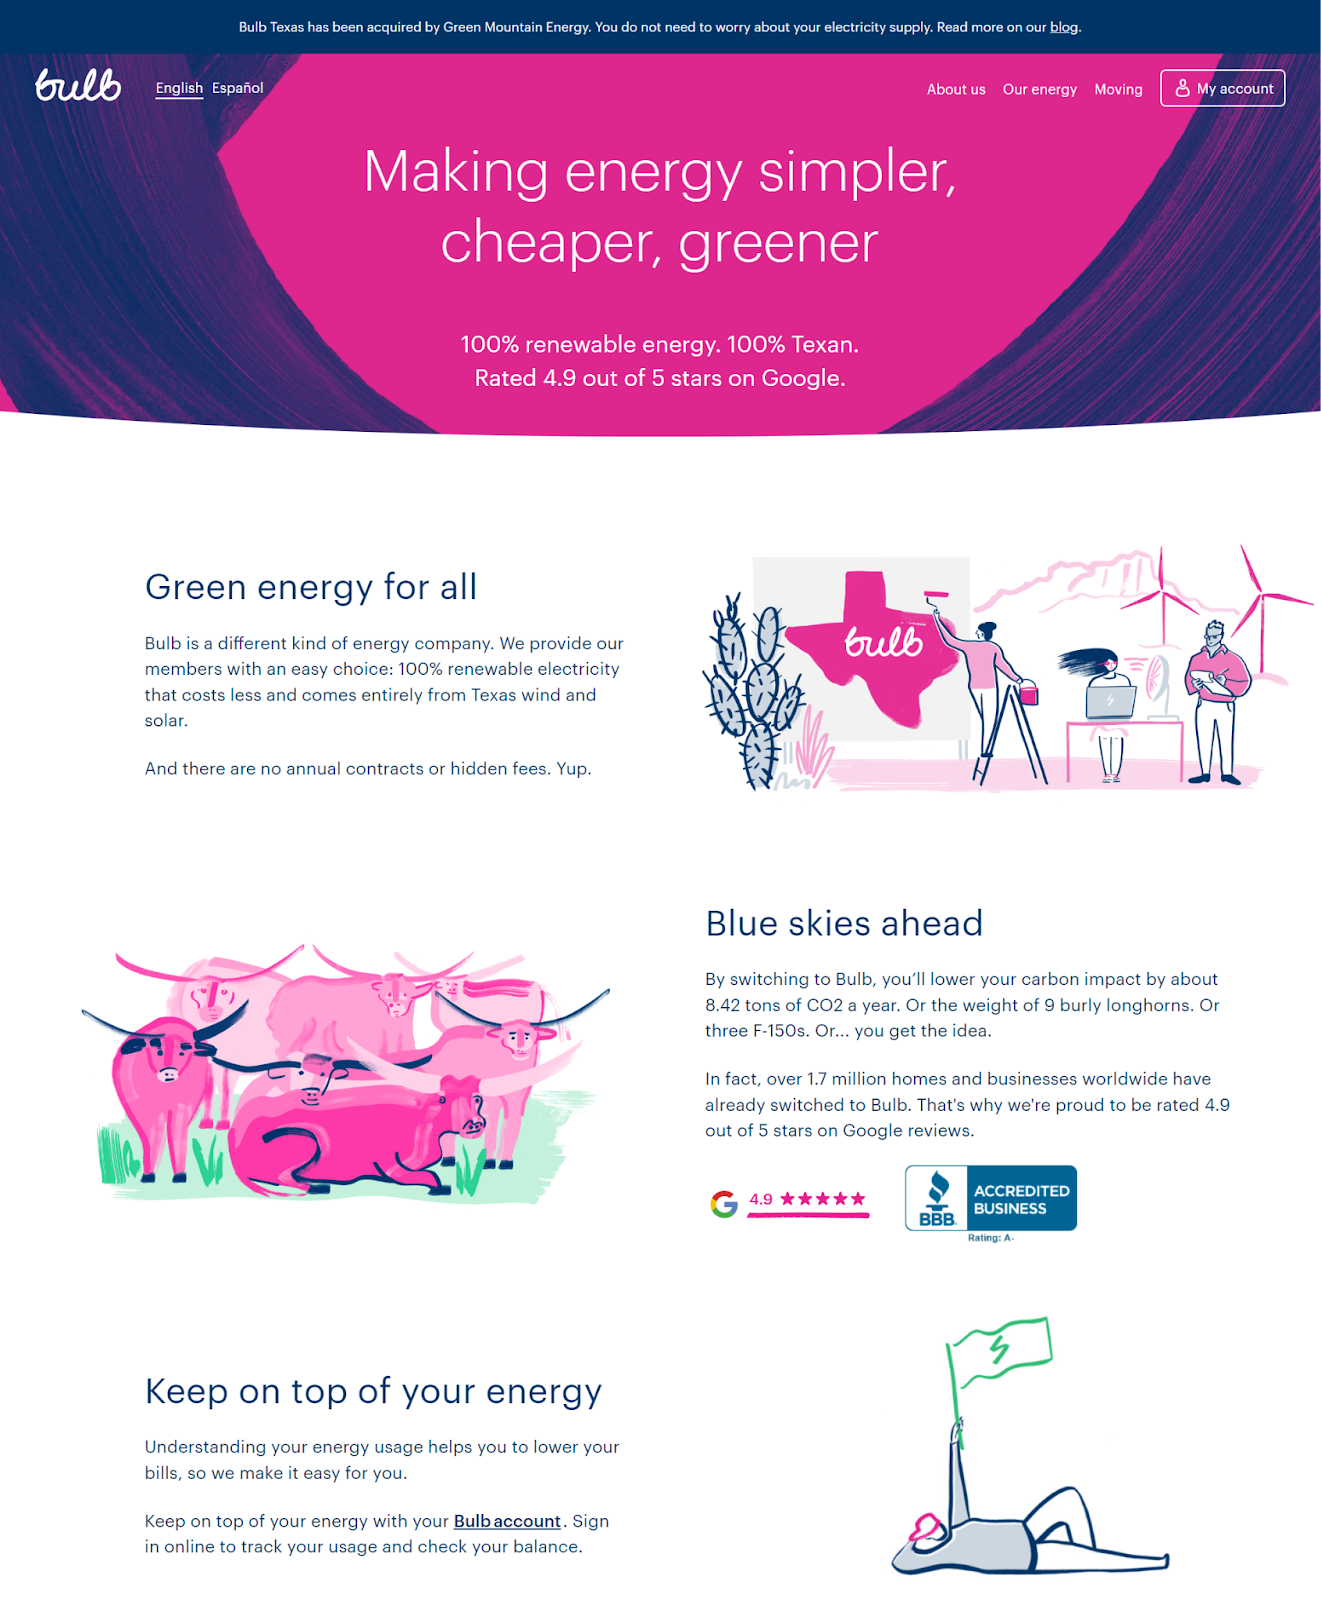 Bulb lead with a pink website design. Pink is used in their hero and across the site in images and icons.